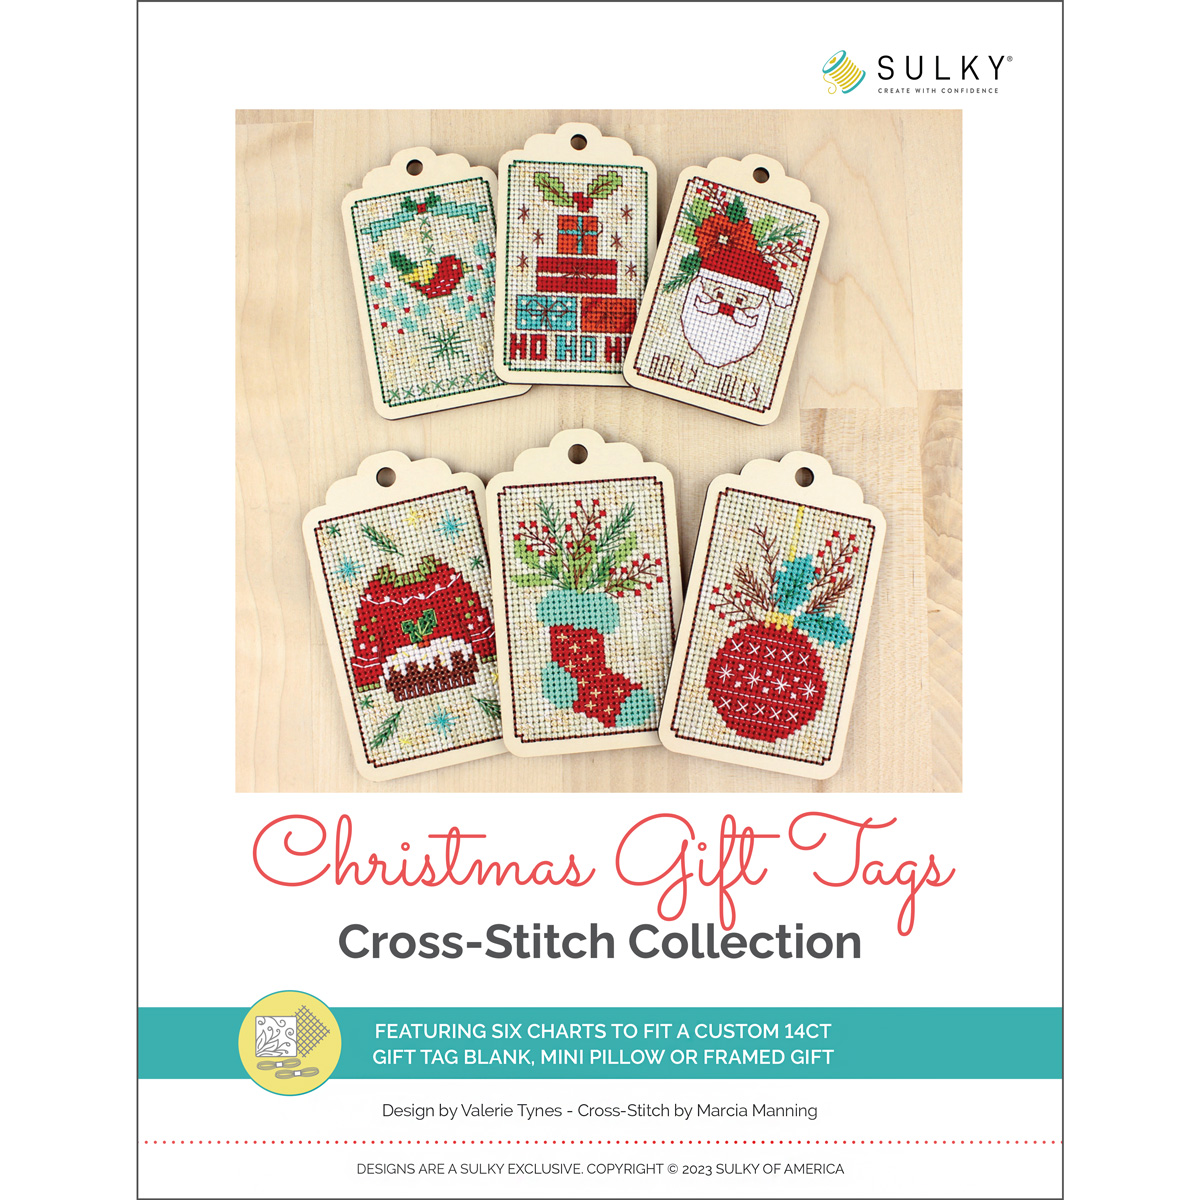 Does the Christmas Gift Tag Cross Stitch Chart Collection- Item DP-HED00020 come with DMC numbers?